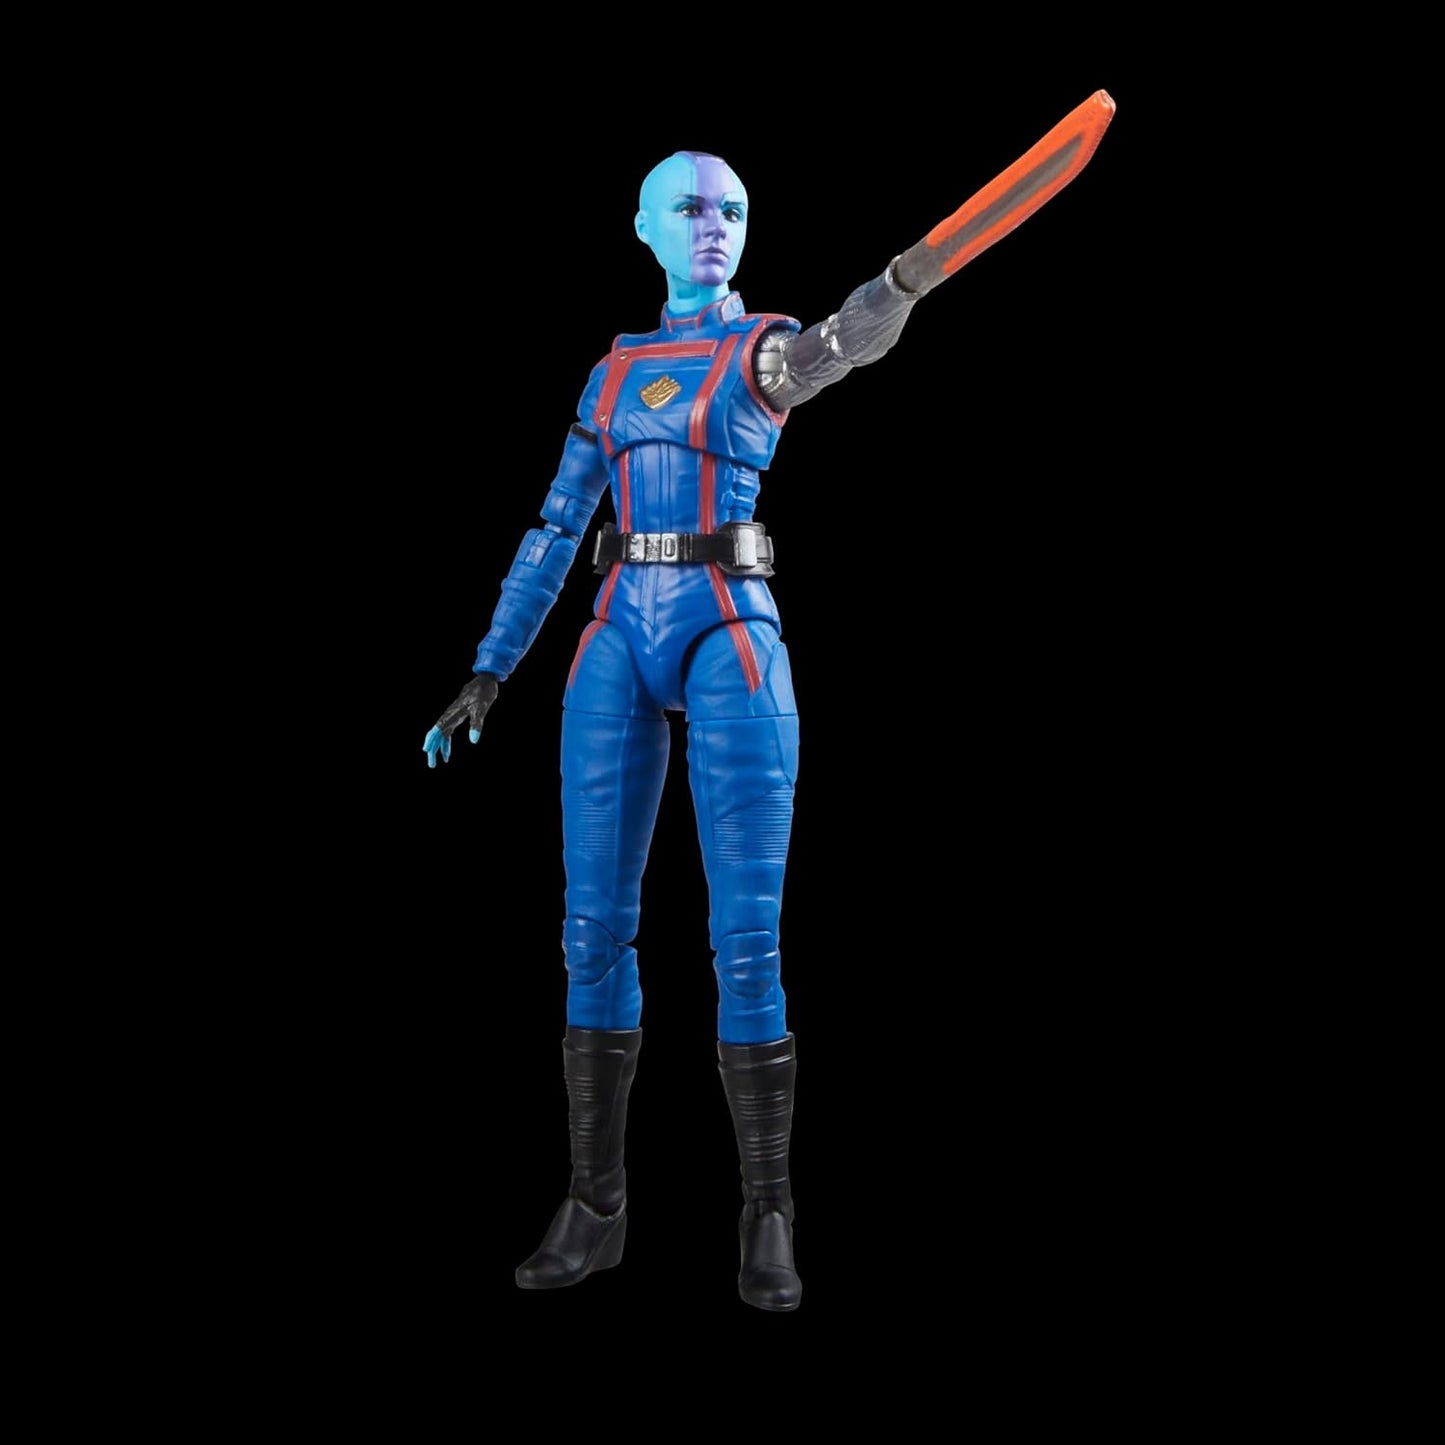 Marvel Legends Series Nebula Guardians of The Galaxy Vol. 3 6-Inch Collectible Action Figure